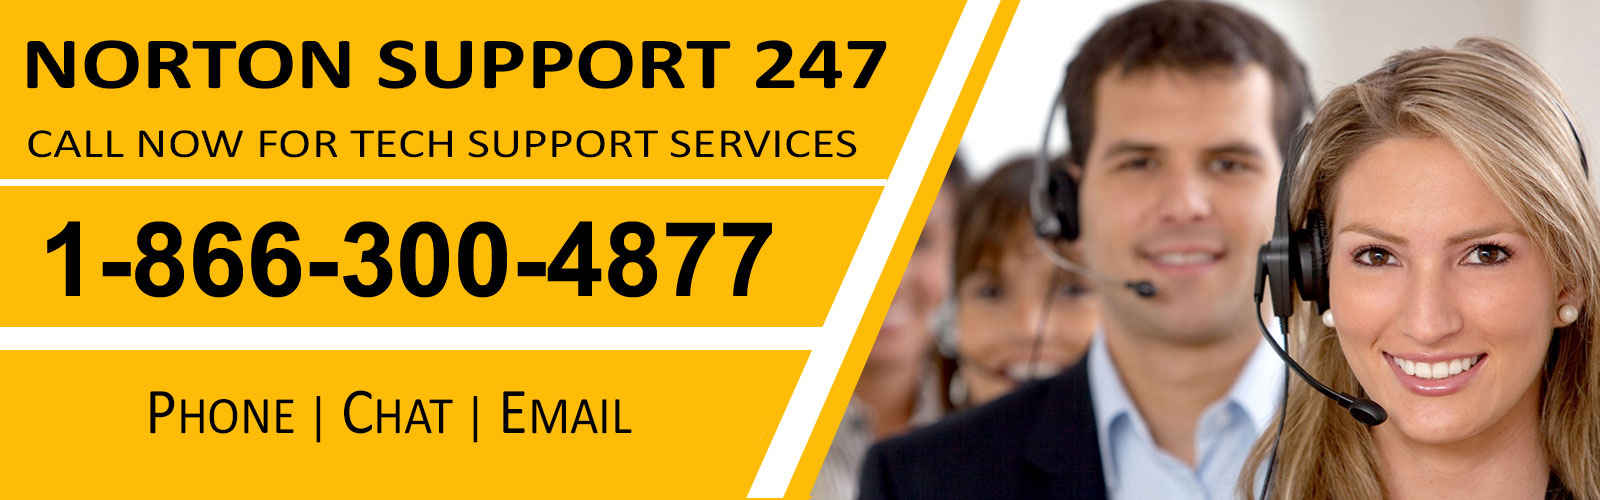 NORTON SUPPORT PHONE NUMBER